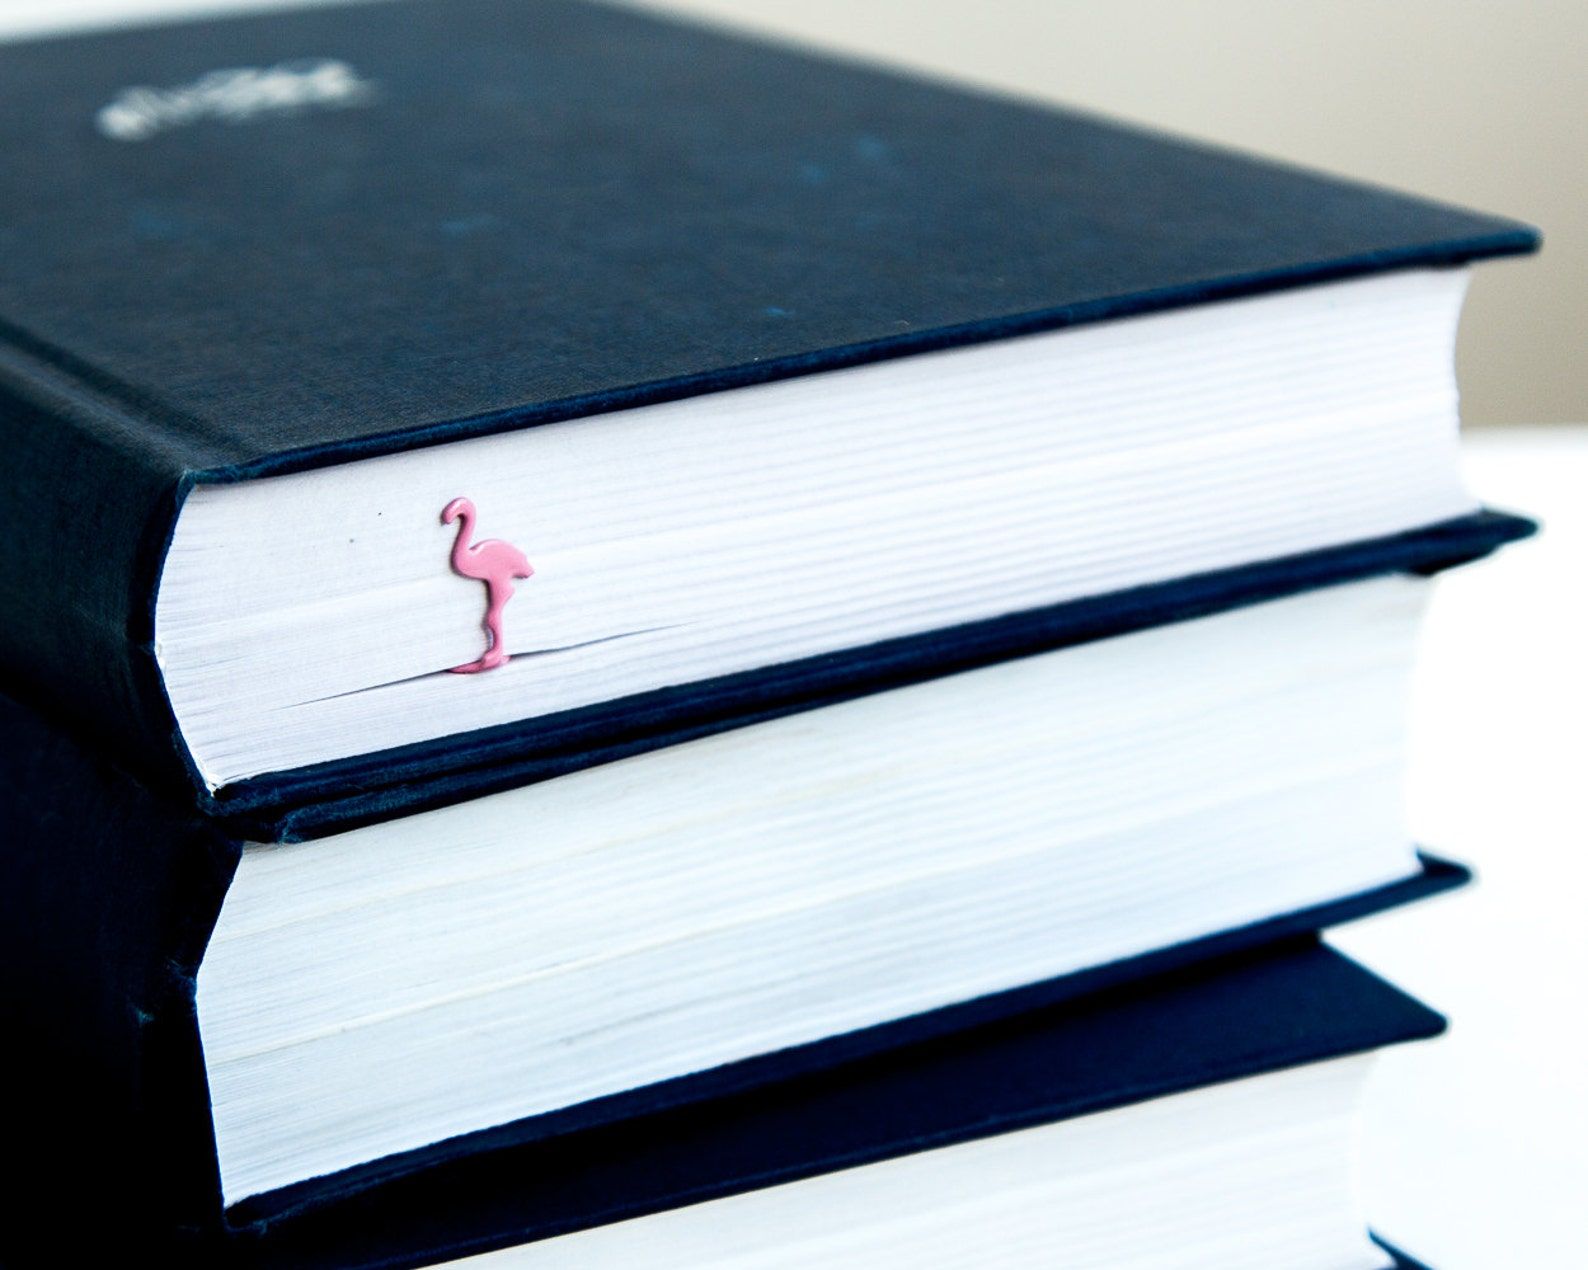 Image of a tiny pink flamingo bookmark peeping out of a black book.